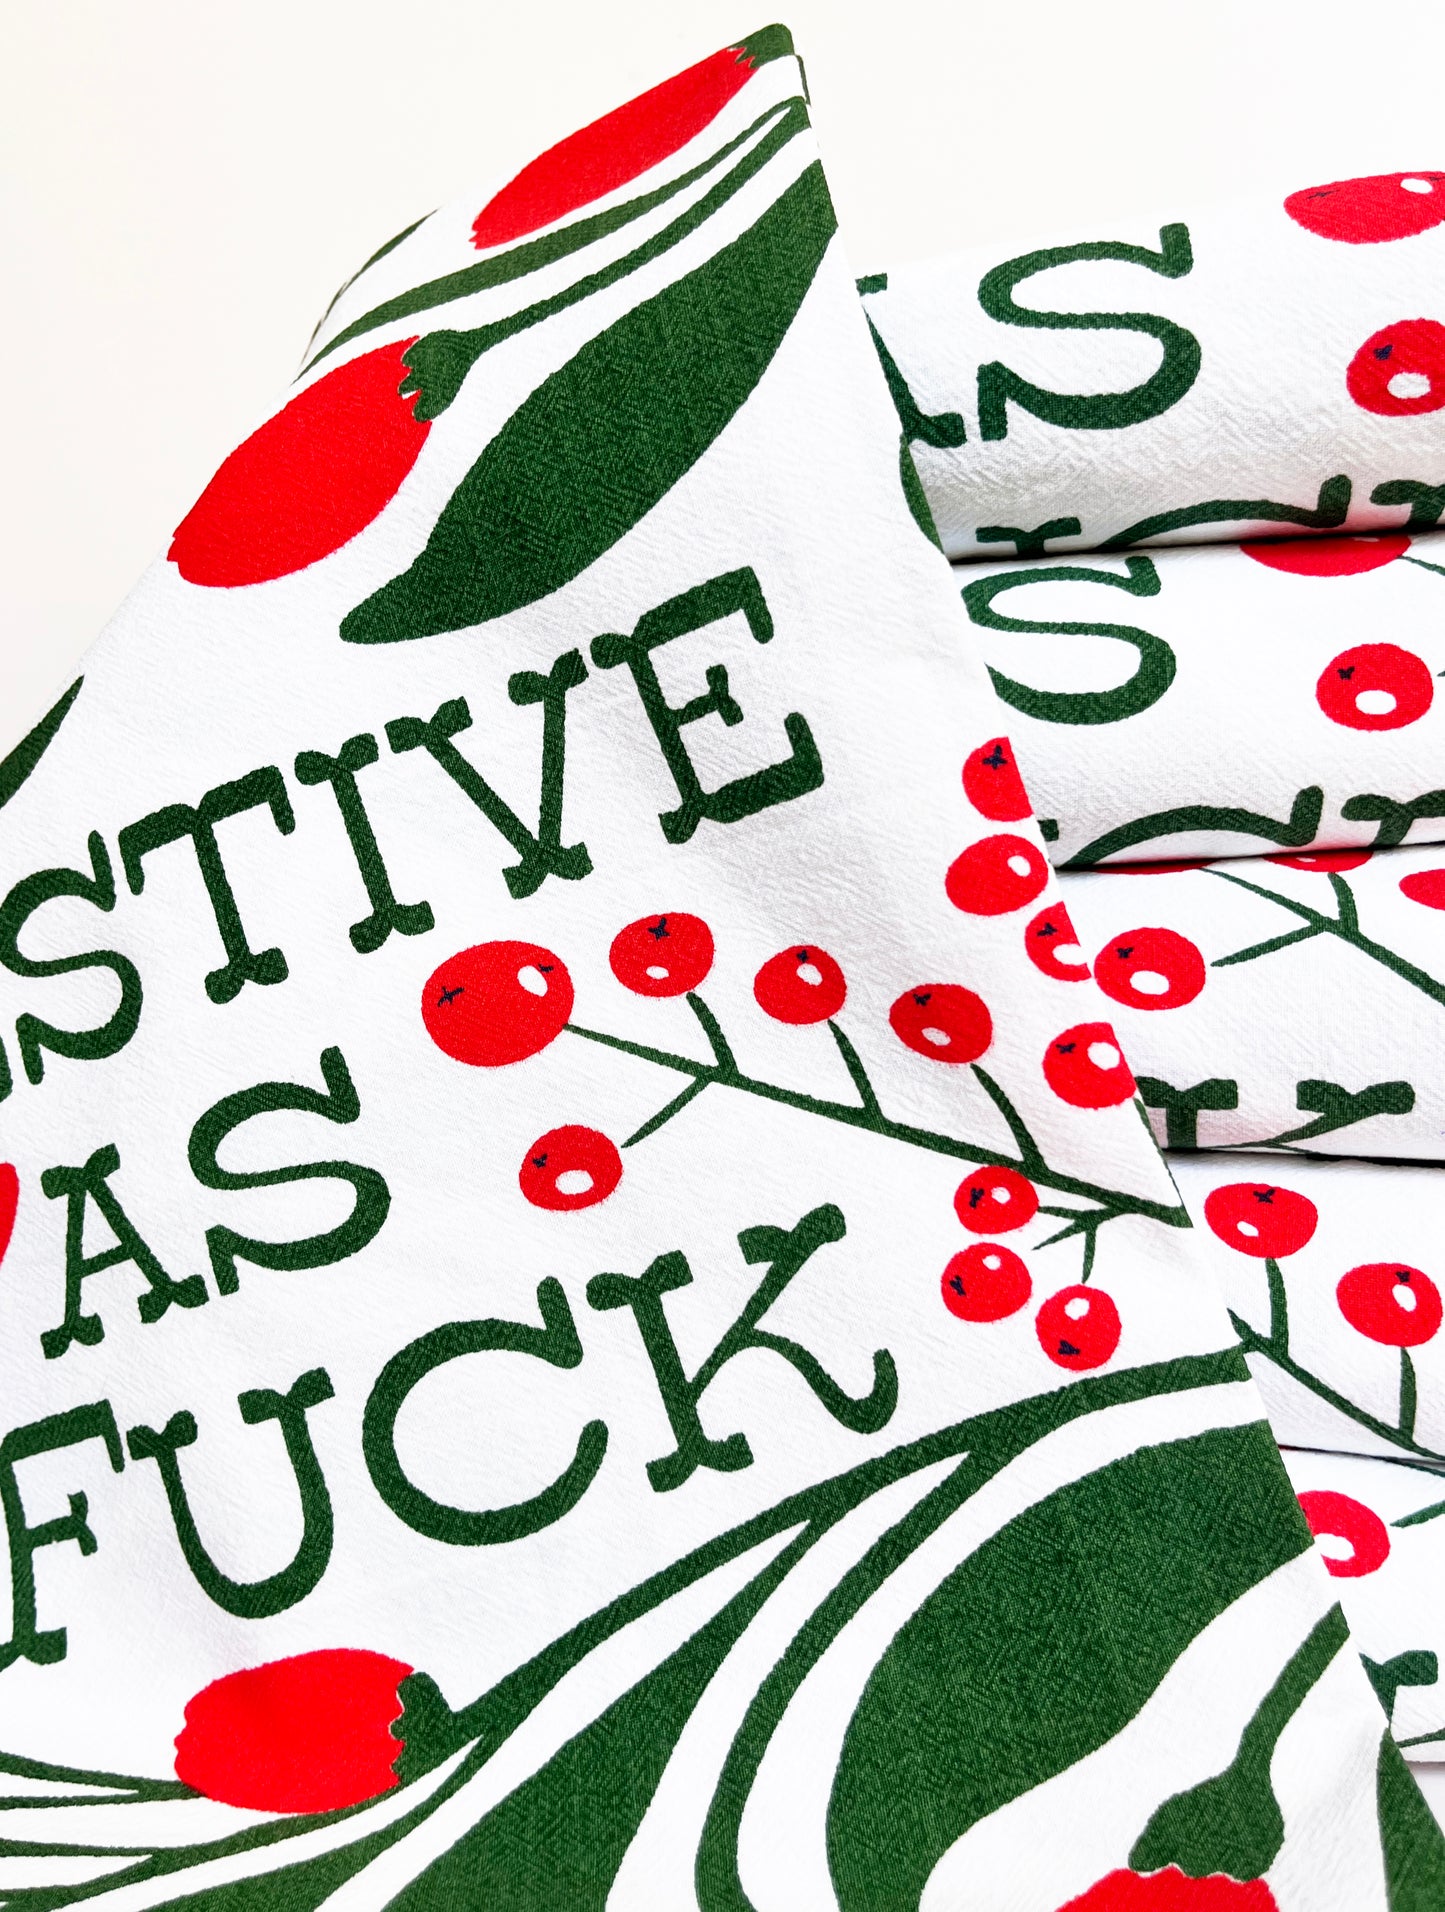 festive as fuck funny holiday home decor for christmas holidays ugly sweater party gift cute retro holidays christmas kitsch tea towel festive dish towel coin laundry montana screen print